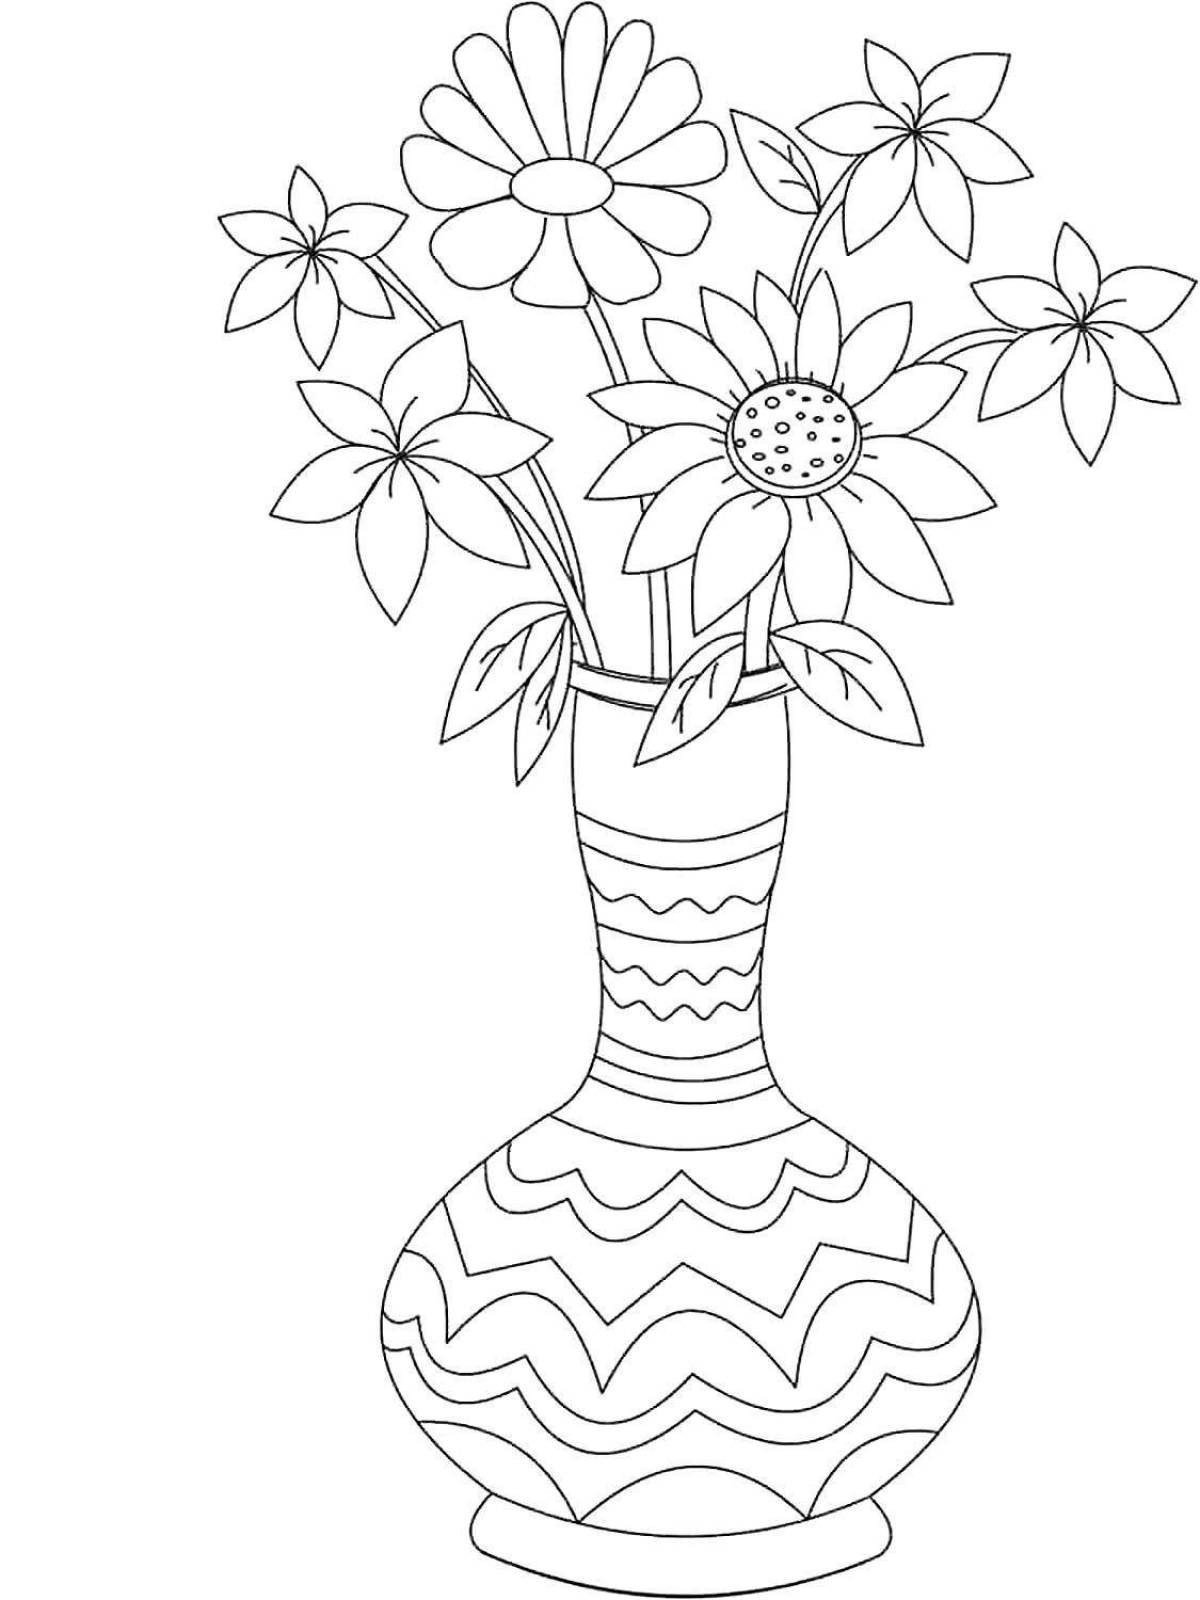 Spicy flower vase coloring for kids